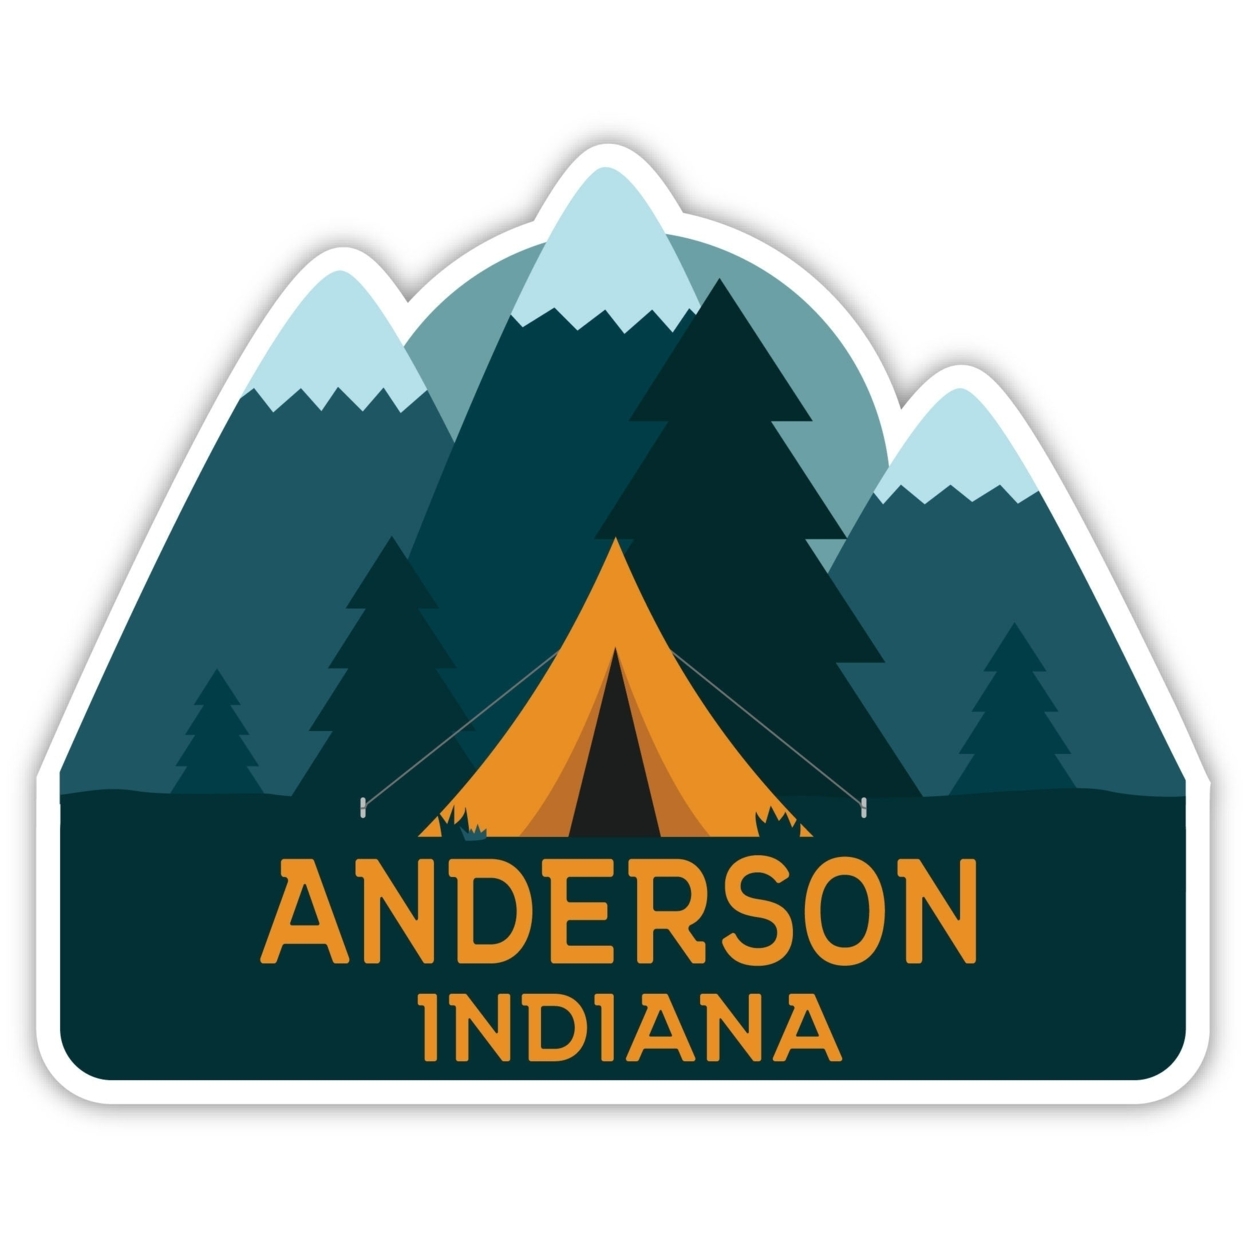 Anderson Indiana Souvenir Decorative Stickers (Choose Theme And Size) - Single Unit, 8-Inch, Tent